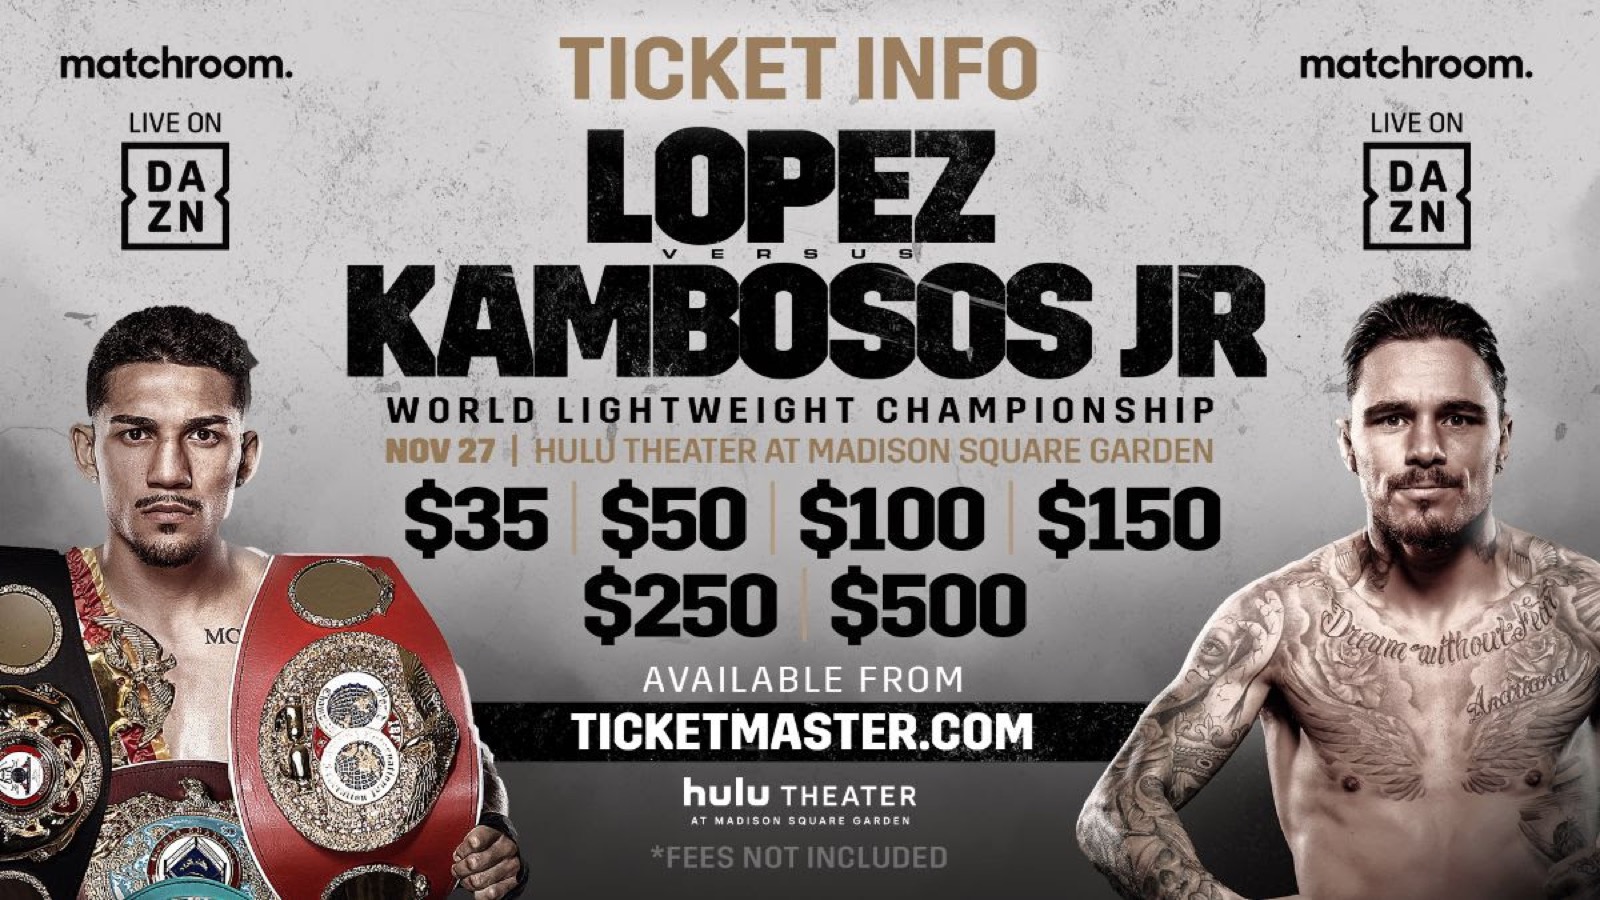 Image: Teofimo Lopez says he's going to "Massecre" George Kambosos Jr in first round on Nov.27th